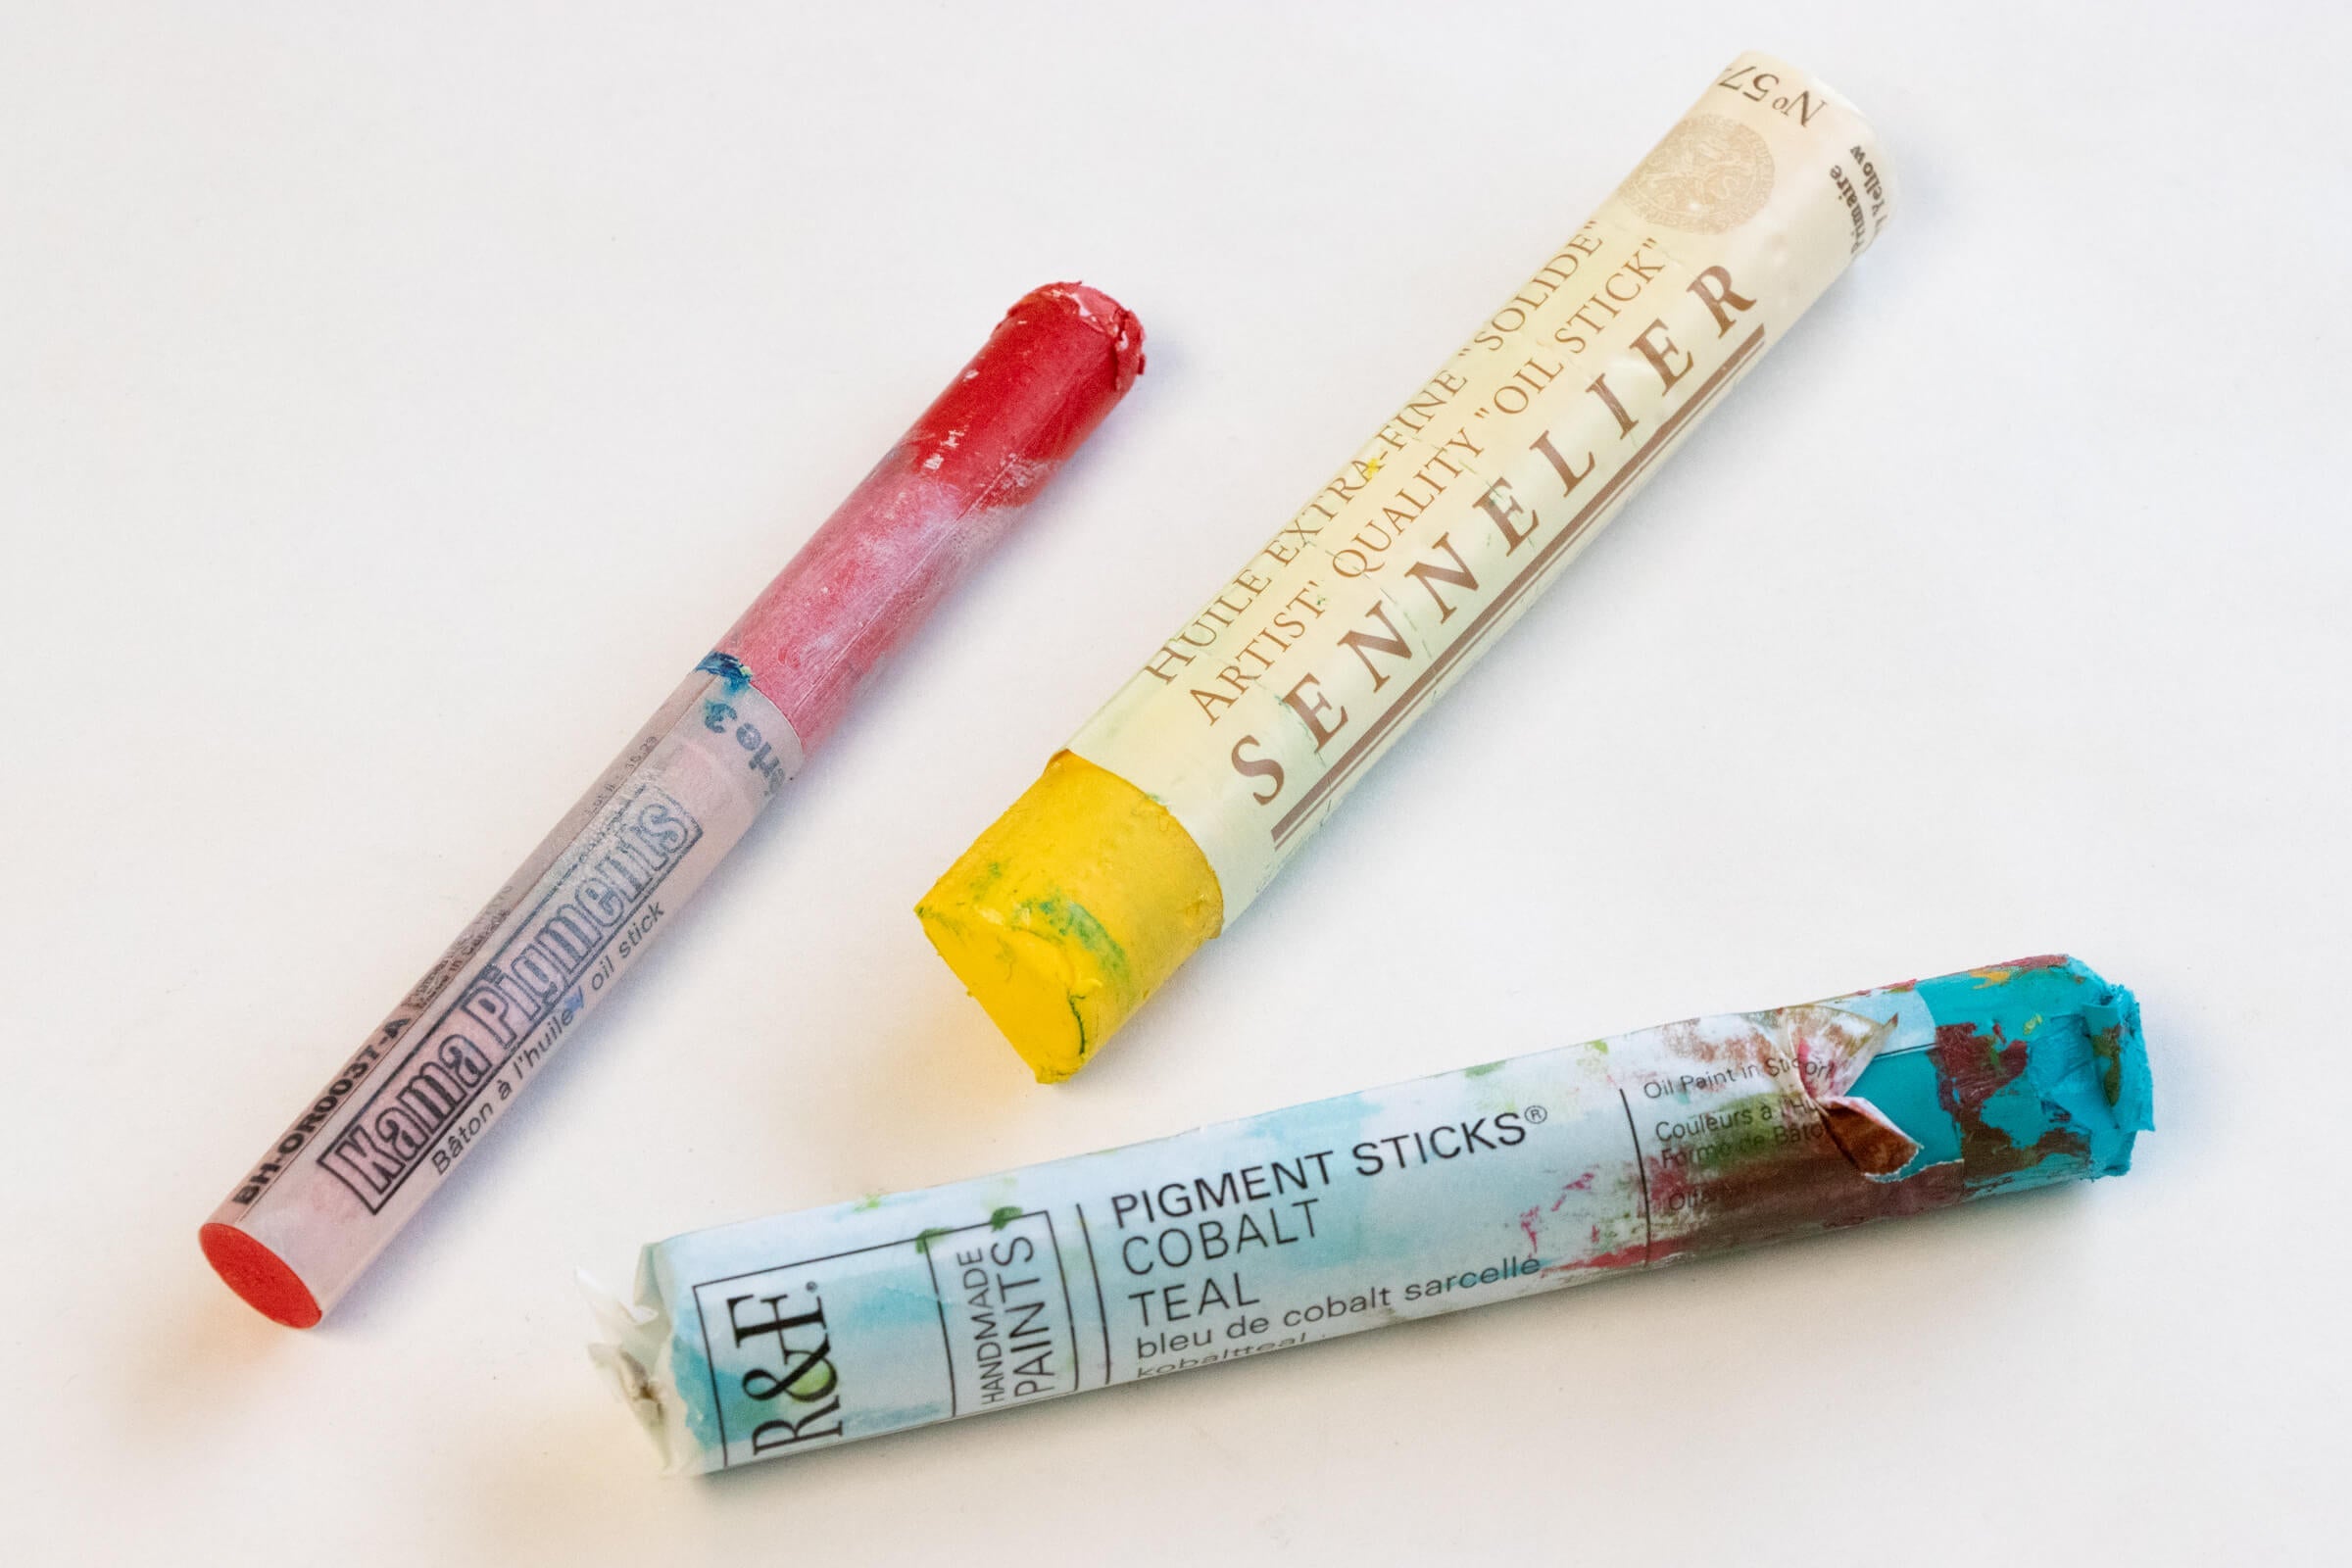 An Intro to Oil Sticks - Learn About Oil Sticks at Opus Art Supplies